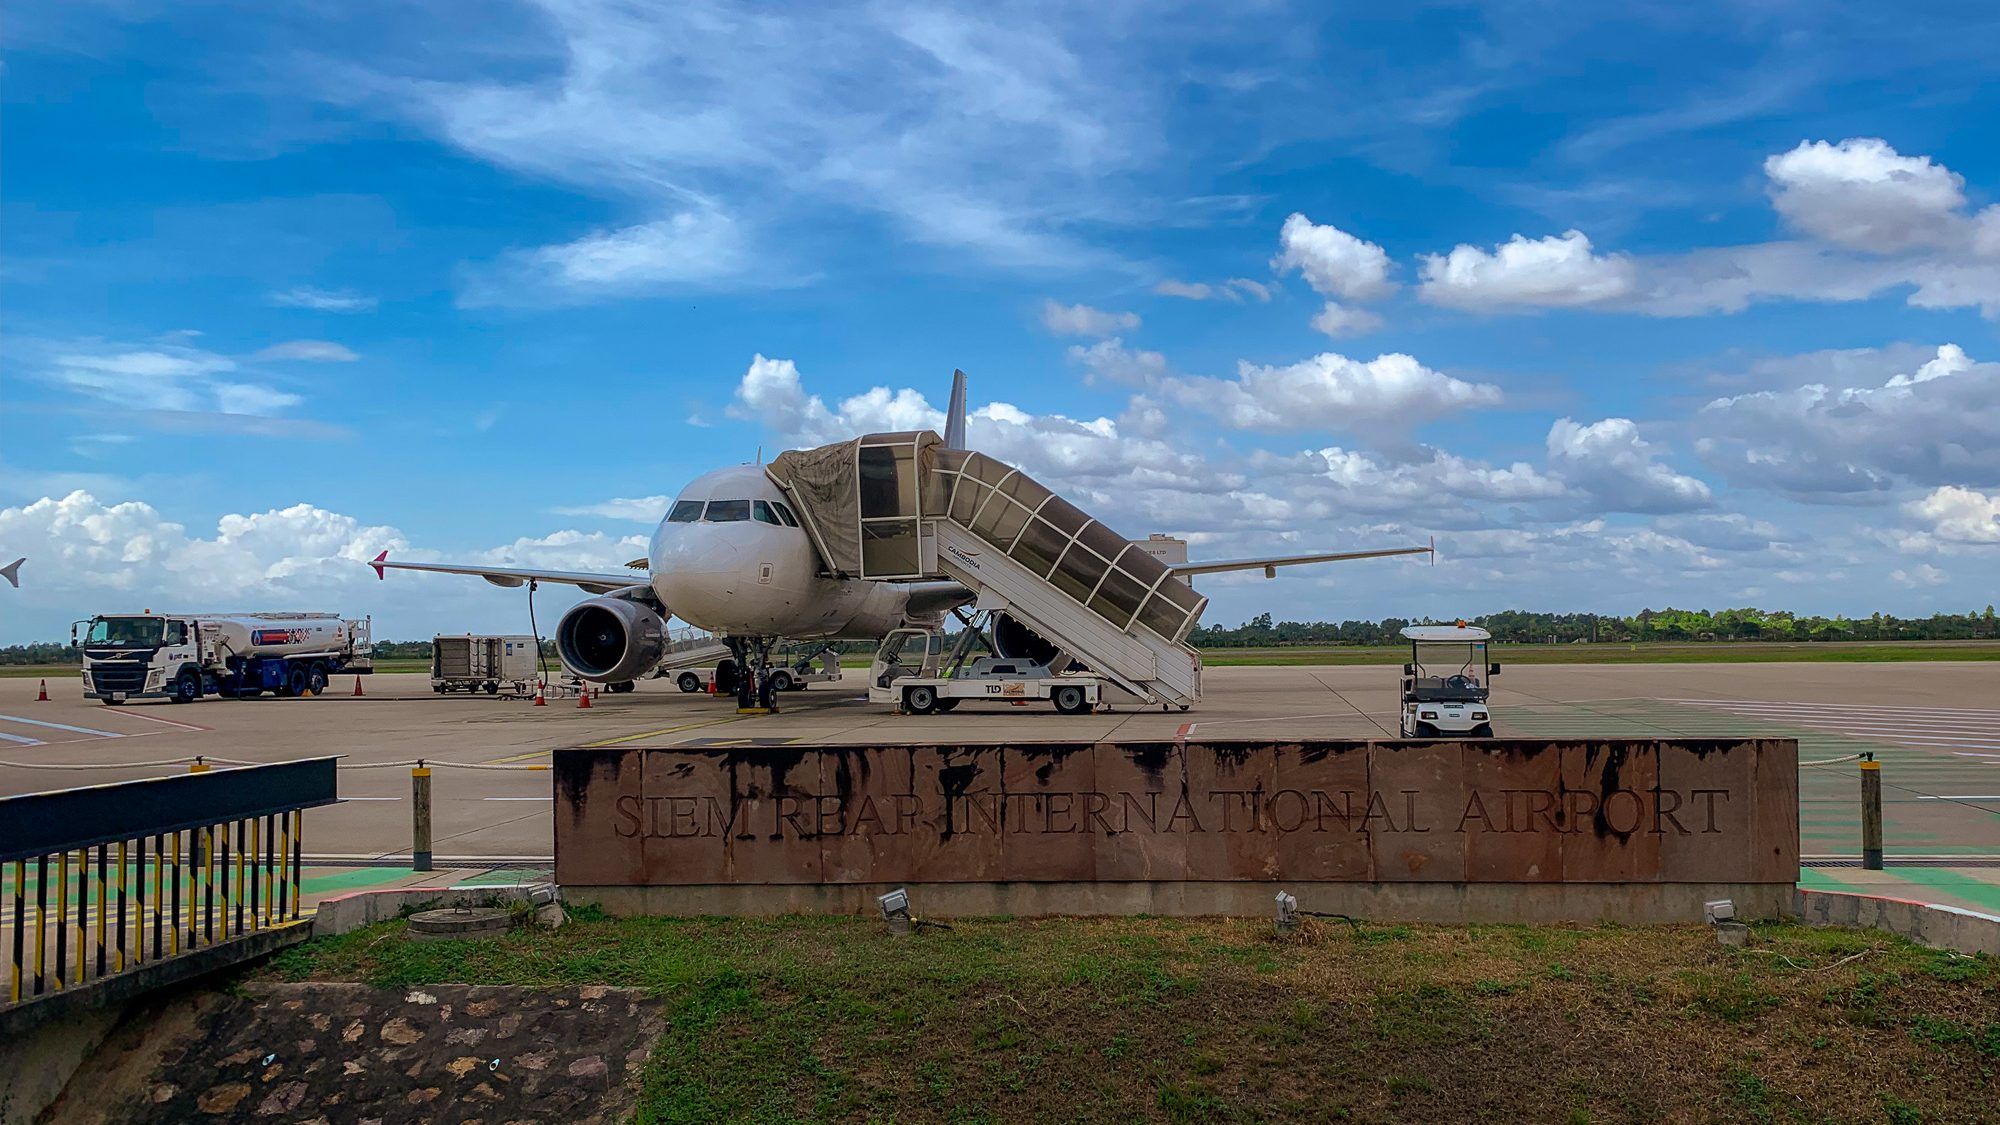 Siam Reap Airport